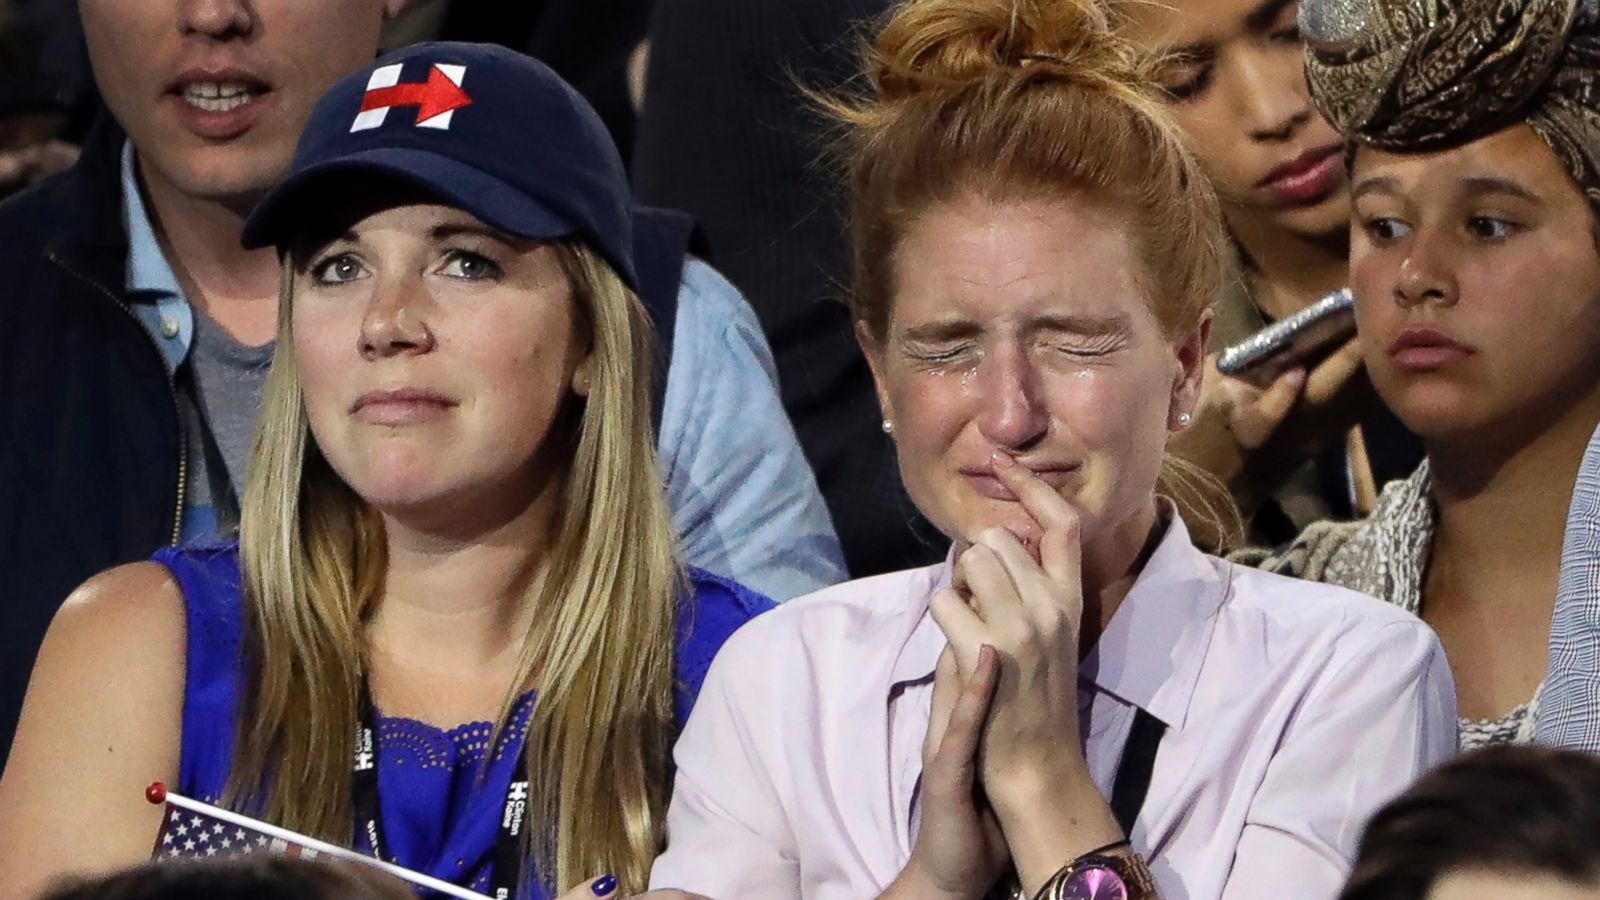 ap-election-hillary-supporters-cry-ps-161108_16x9_1600.jpg